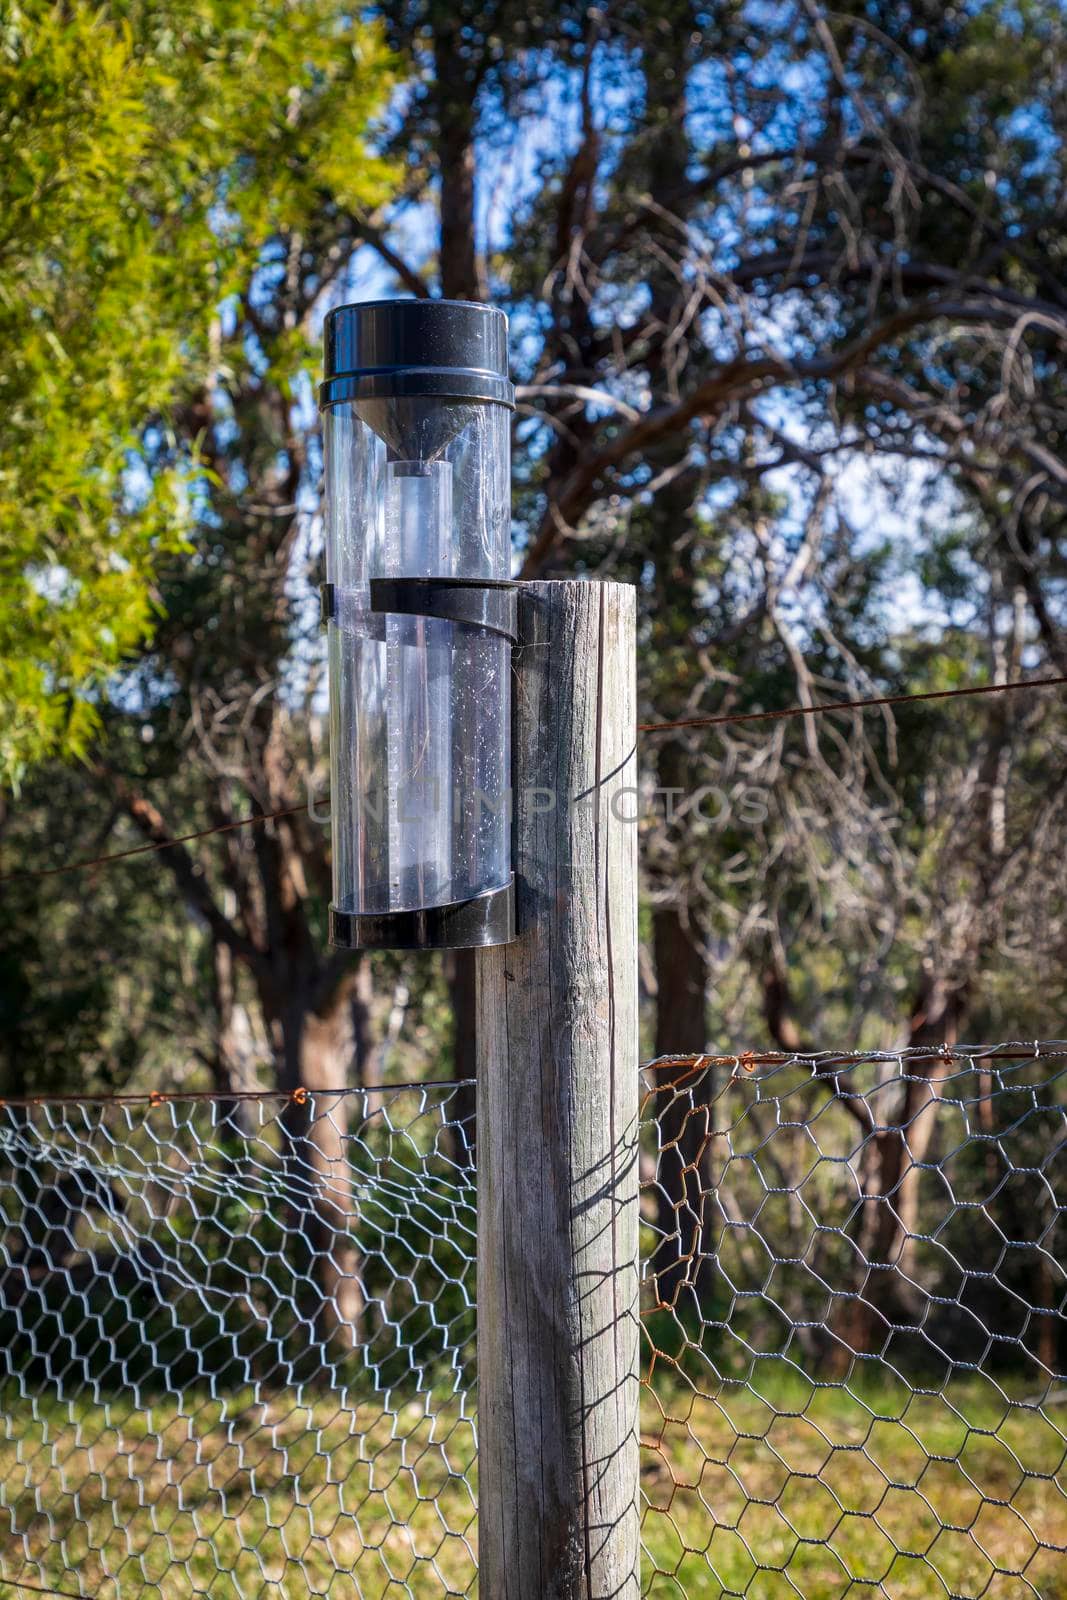 A rain gauge bolted to a wooden post by WittkePhotos